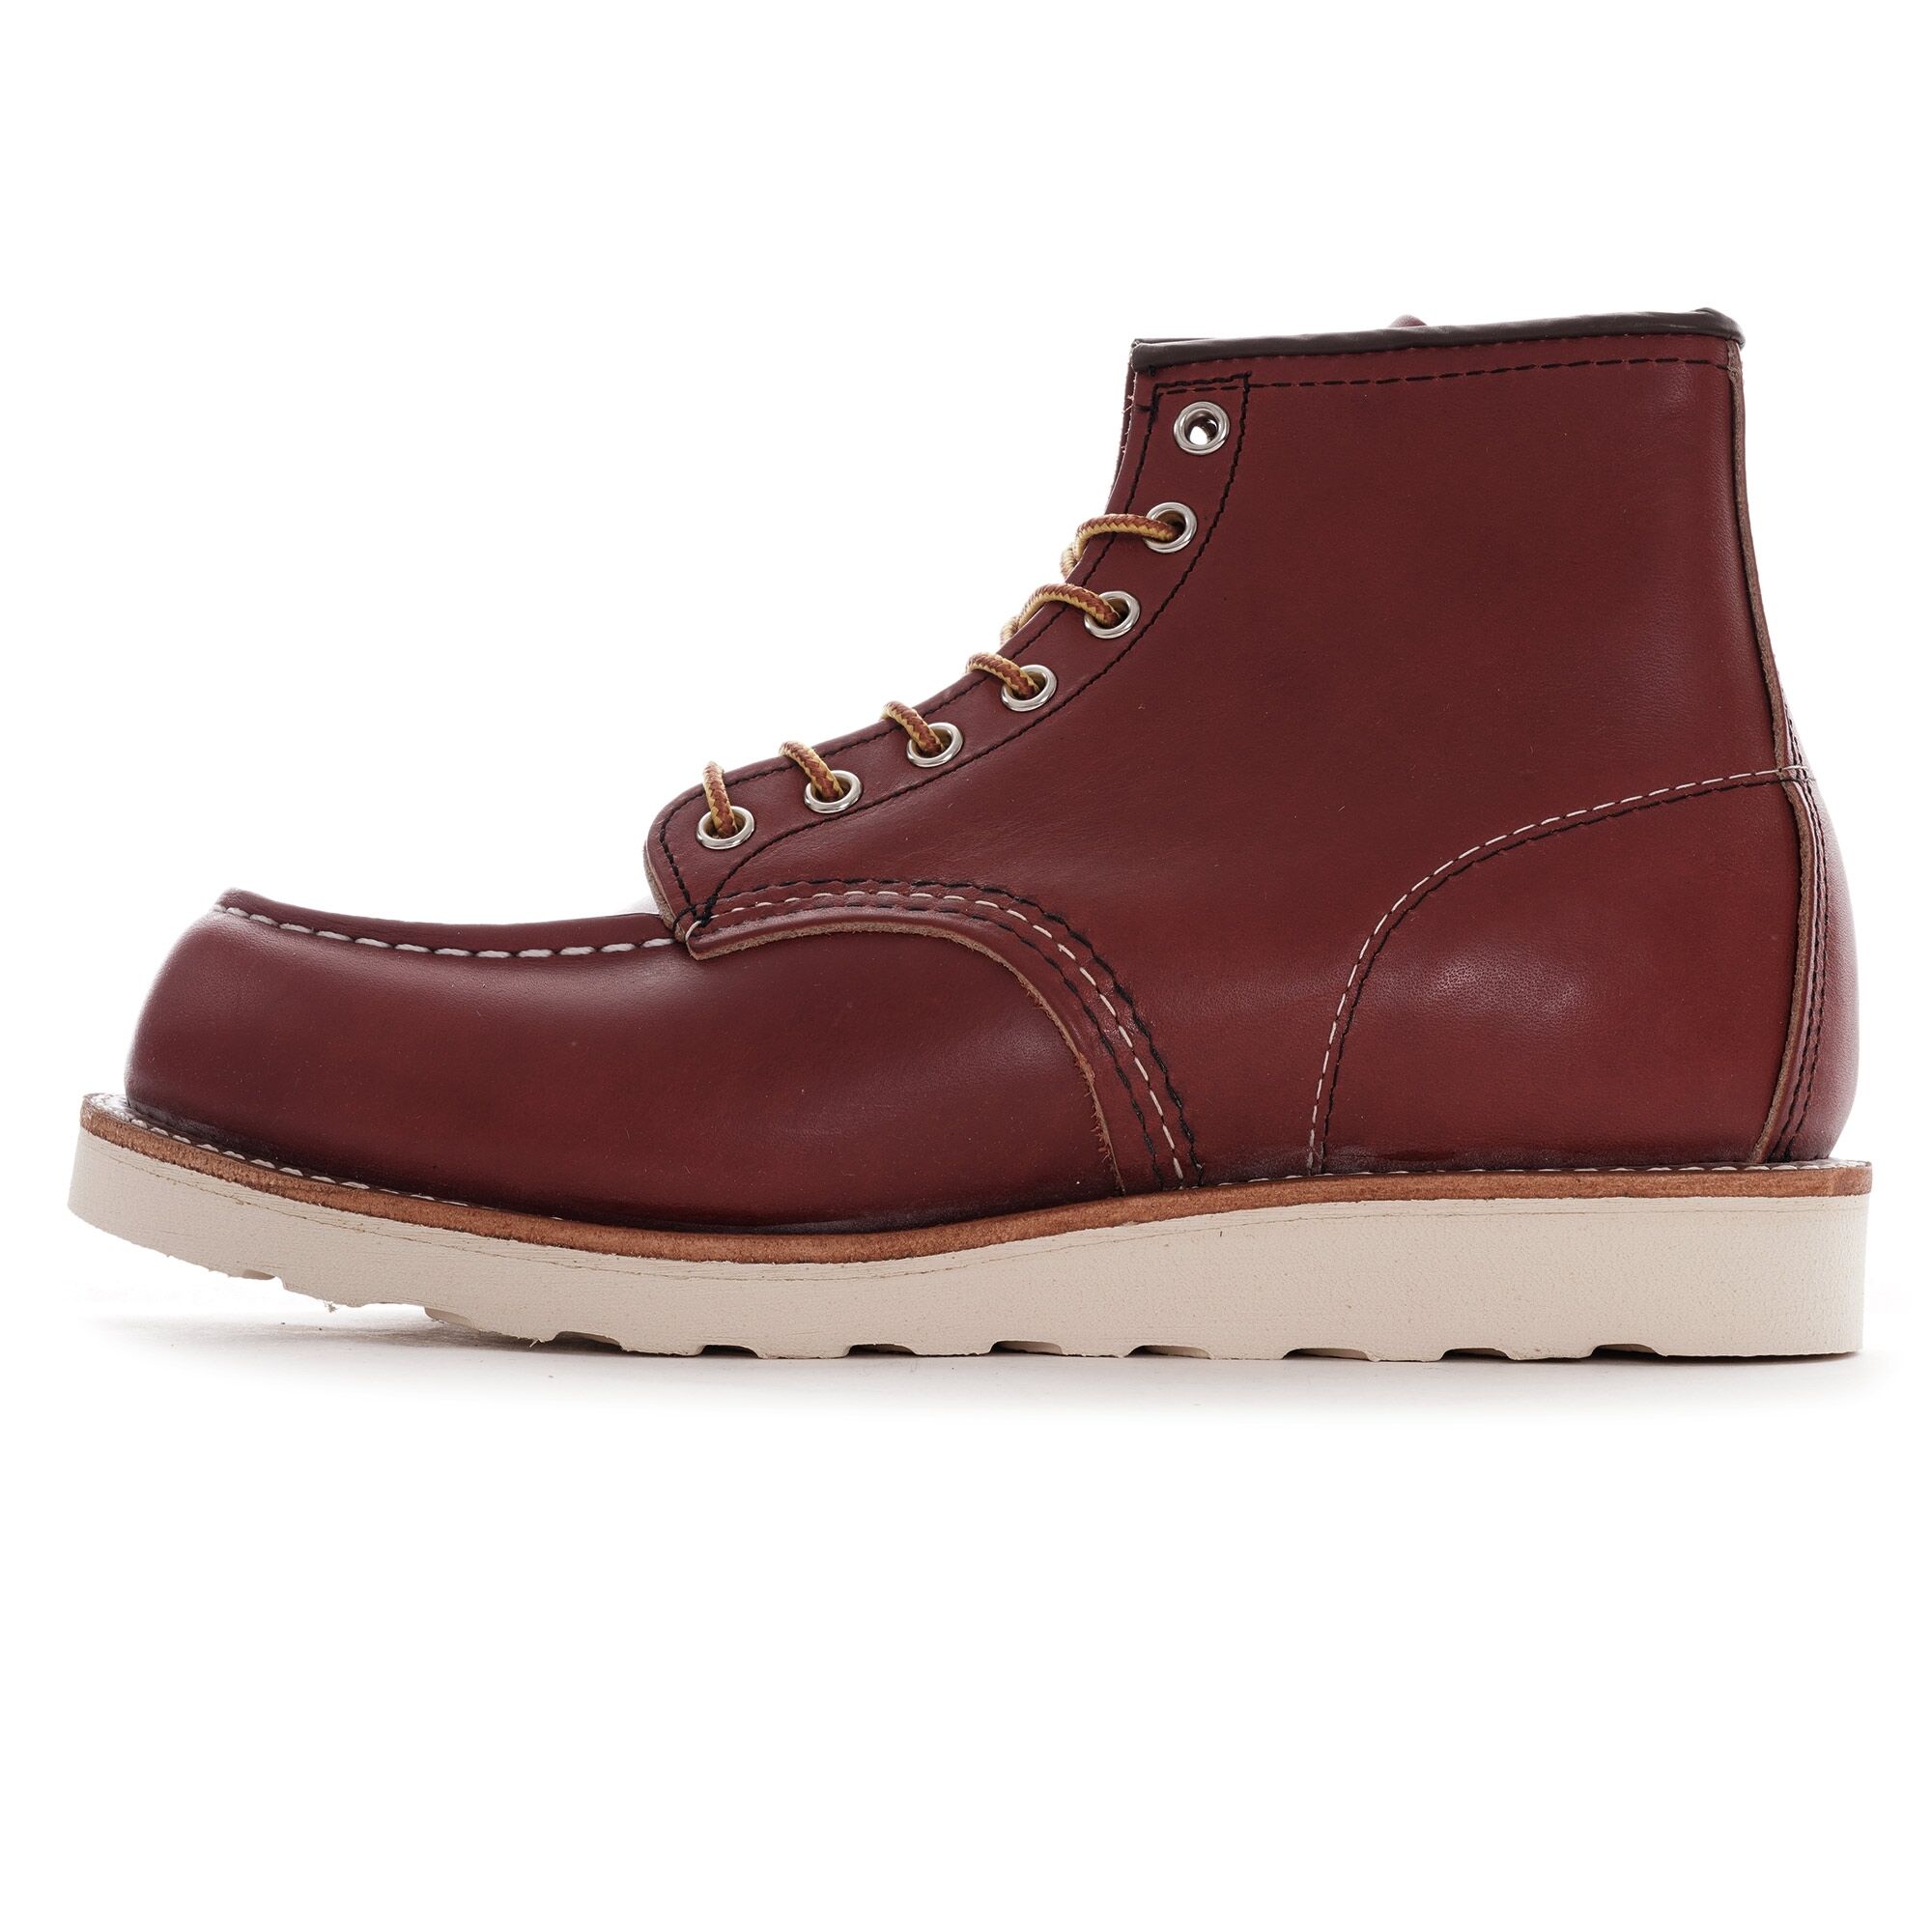 Red Wing Classic Moc Toe Boot - Briar - 8875D-BRN 6 BOOT Colour: Brown - Brown - male - Size: UK 6